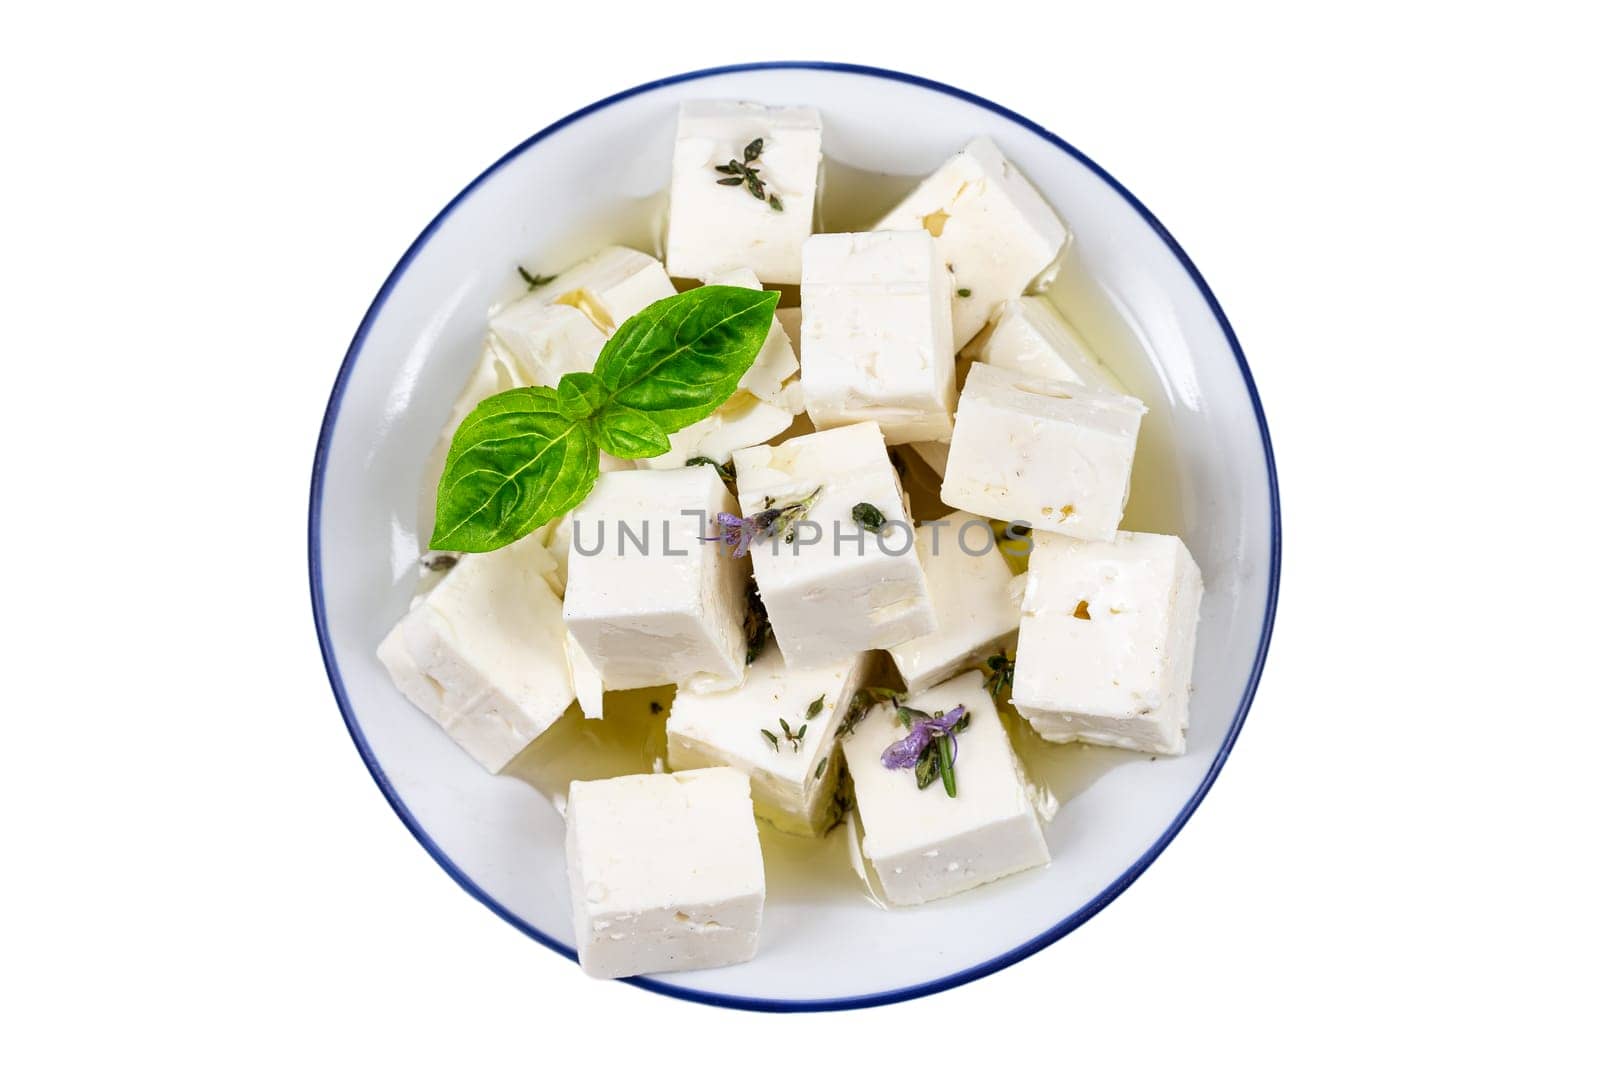 cbes of Feta cheese isolated on white background clipping Heap of Feta cheese, basil leaves and tomatoes. by JPC-PROD